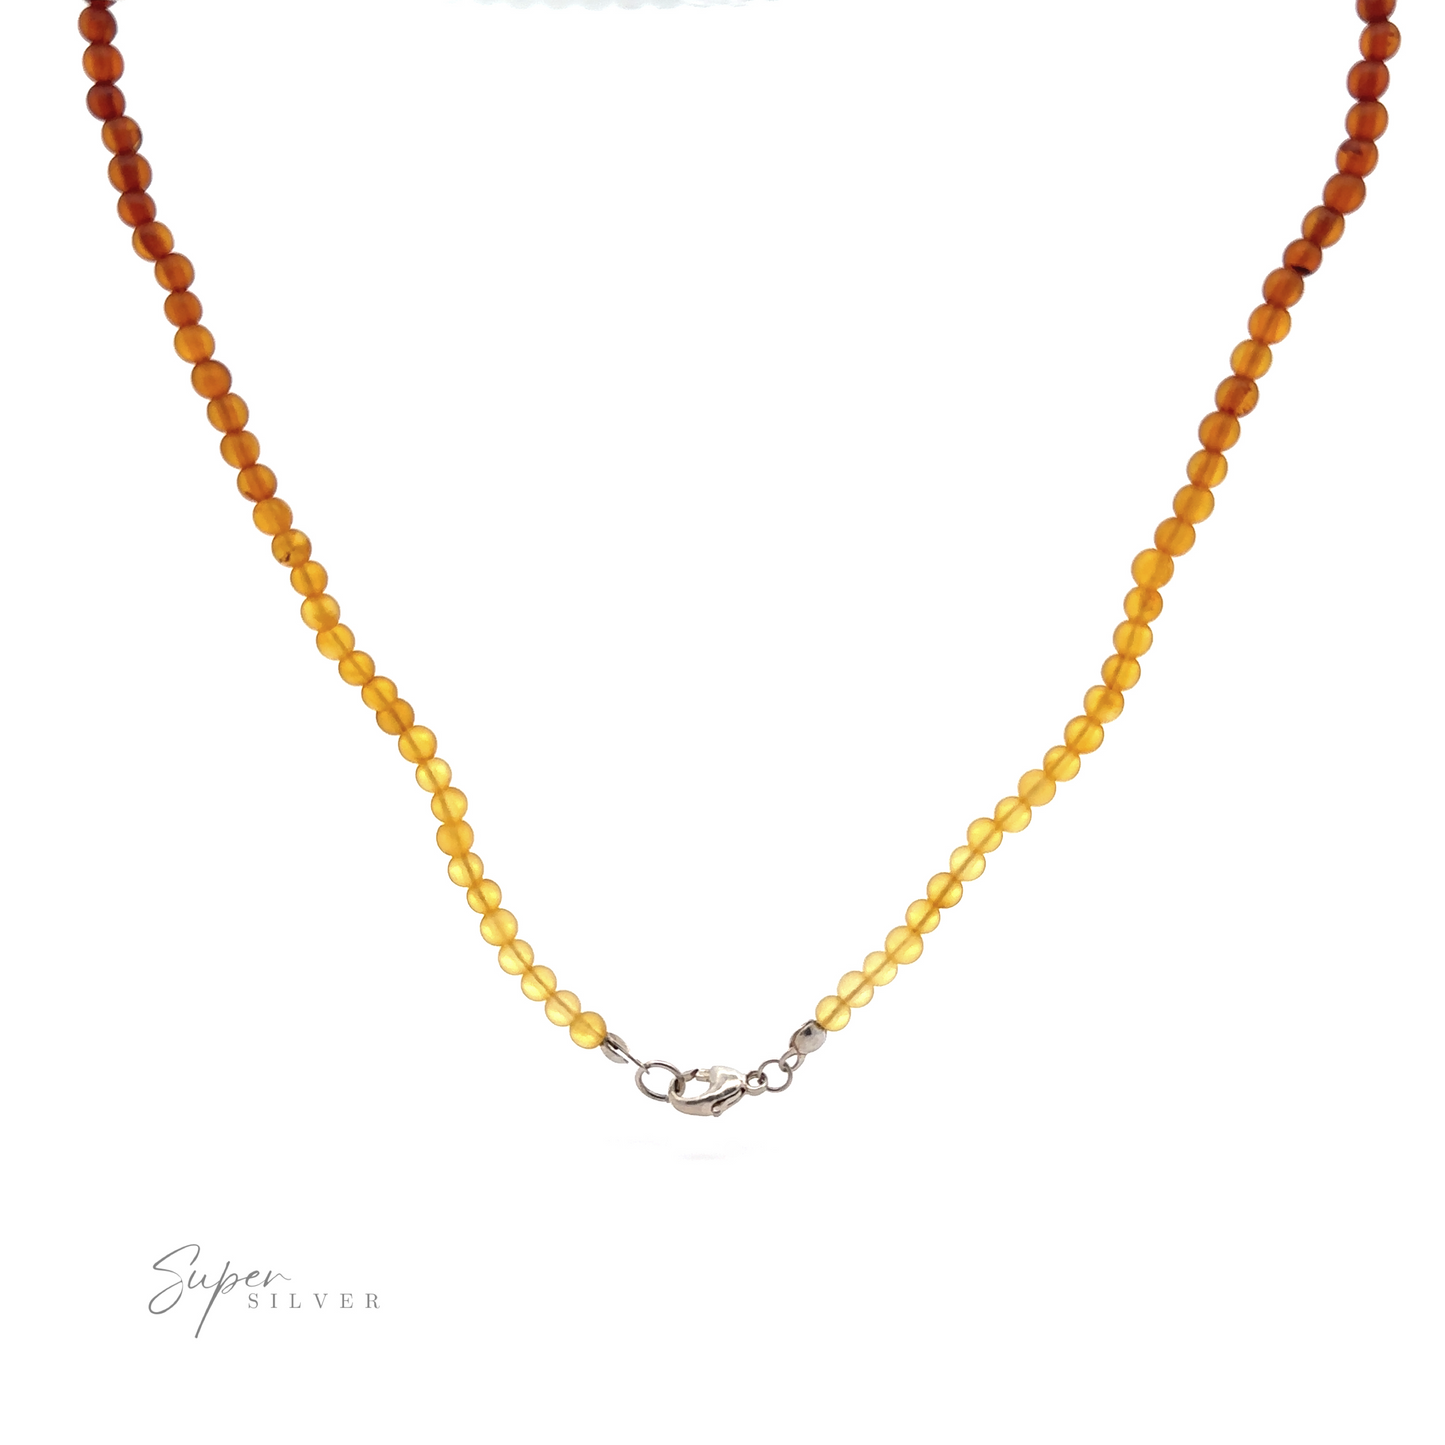 
                  
                    A stunning Ombre Beaded Amber Necklace with a gradient of round beads ranging from amber to yellow, featuring a sterling silver clasp. The beads are arranged in a single strand and taper in color intensity. "Super Silver" is written at the bottom left, marking this exquisite piece of sterling silver jewelry.
                  
                